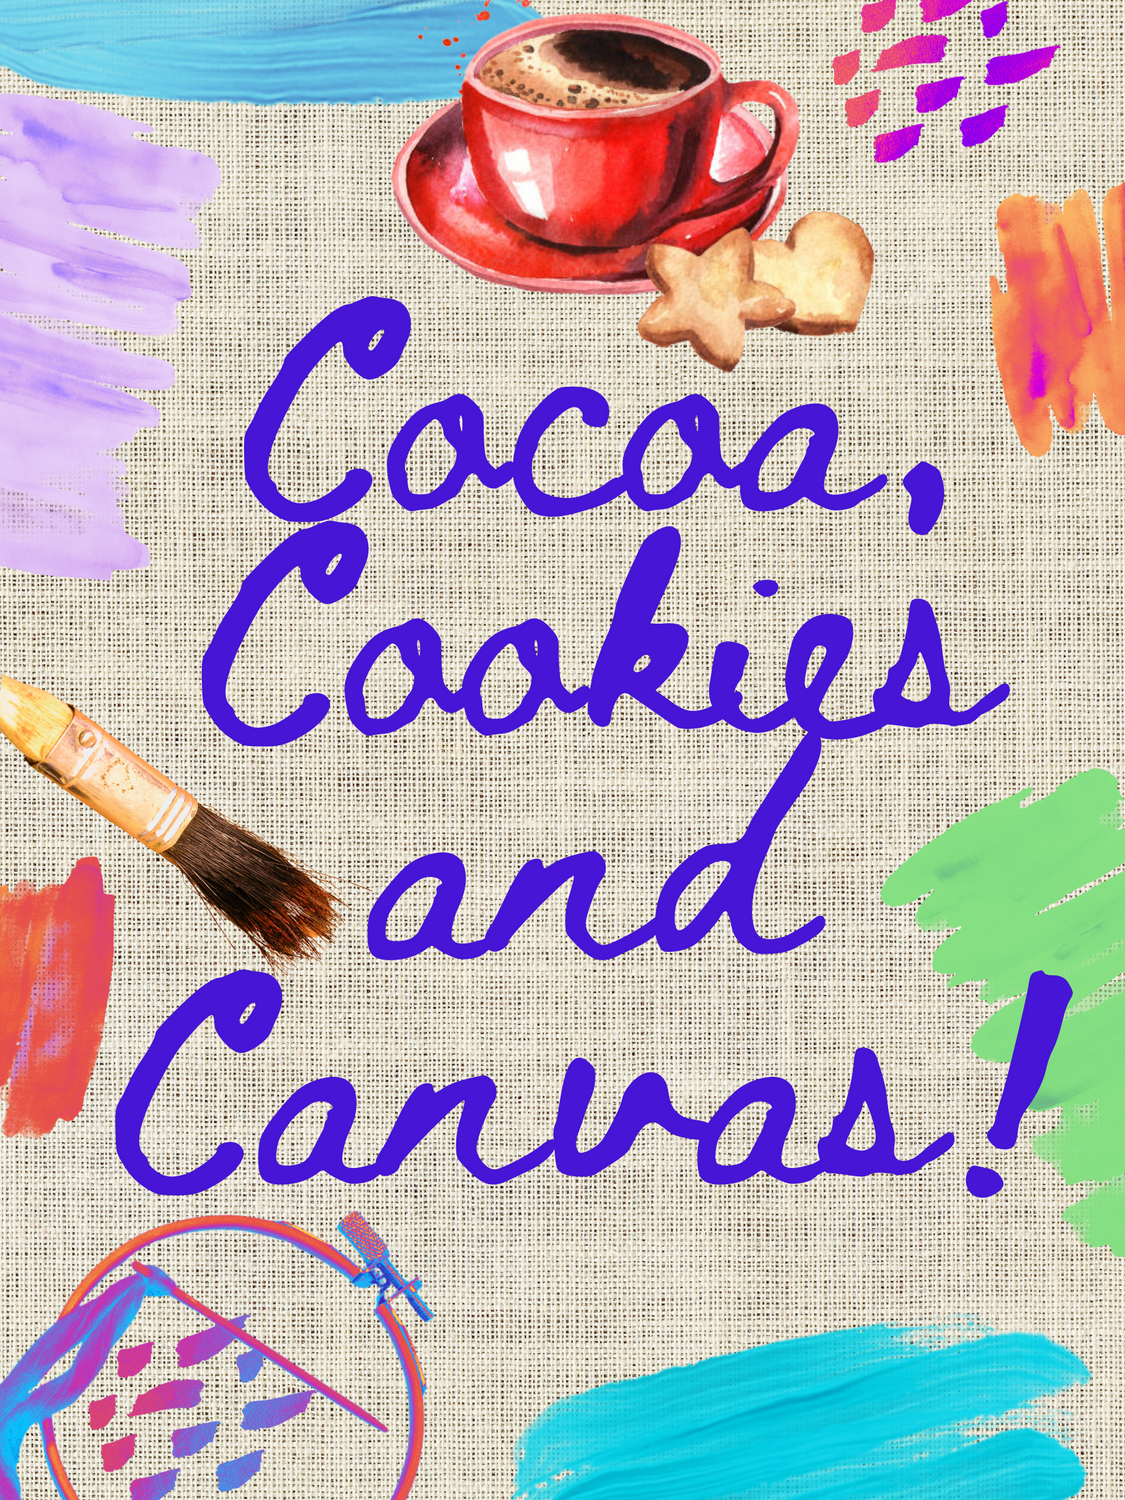 Creative Readers -Cocoa, Cookies and Canvas!